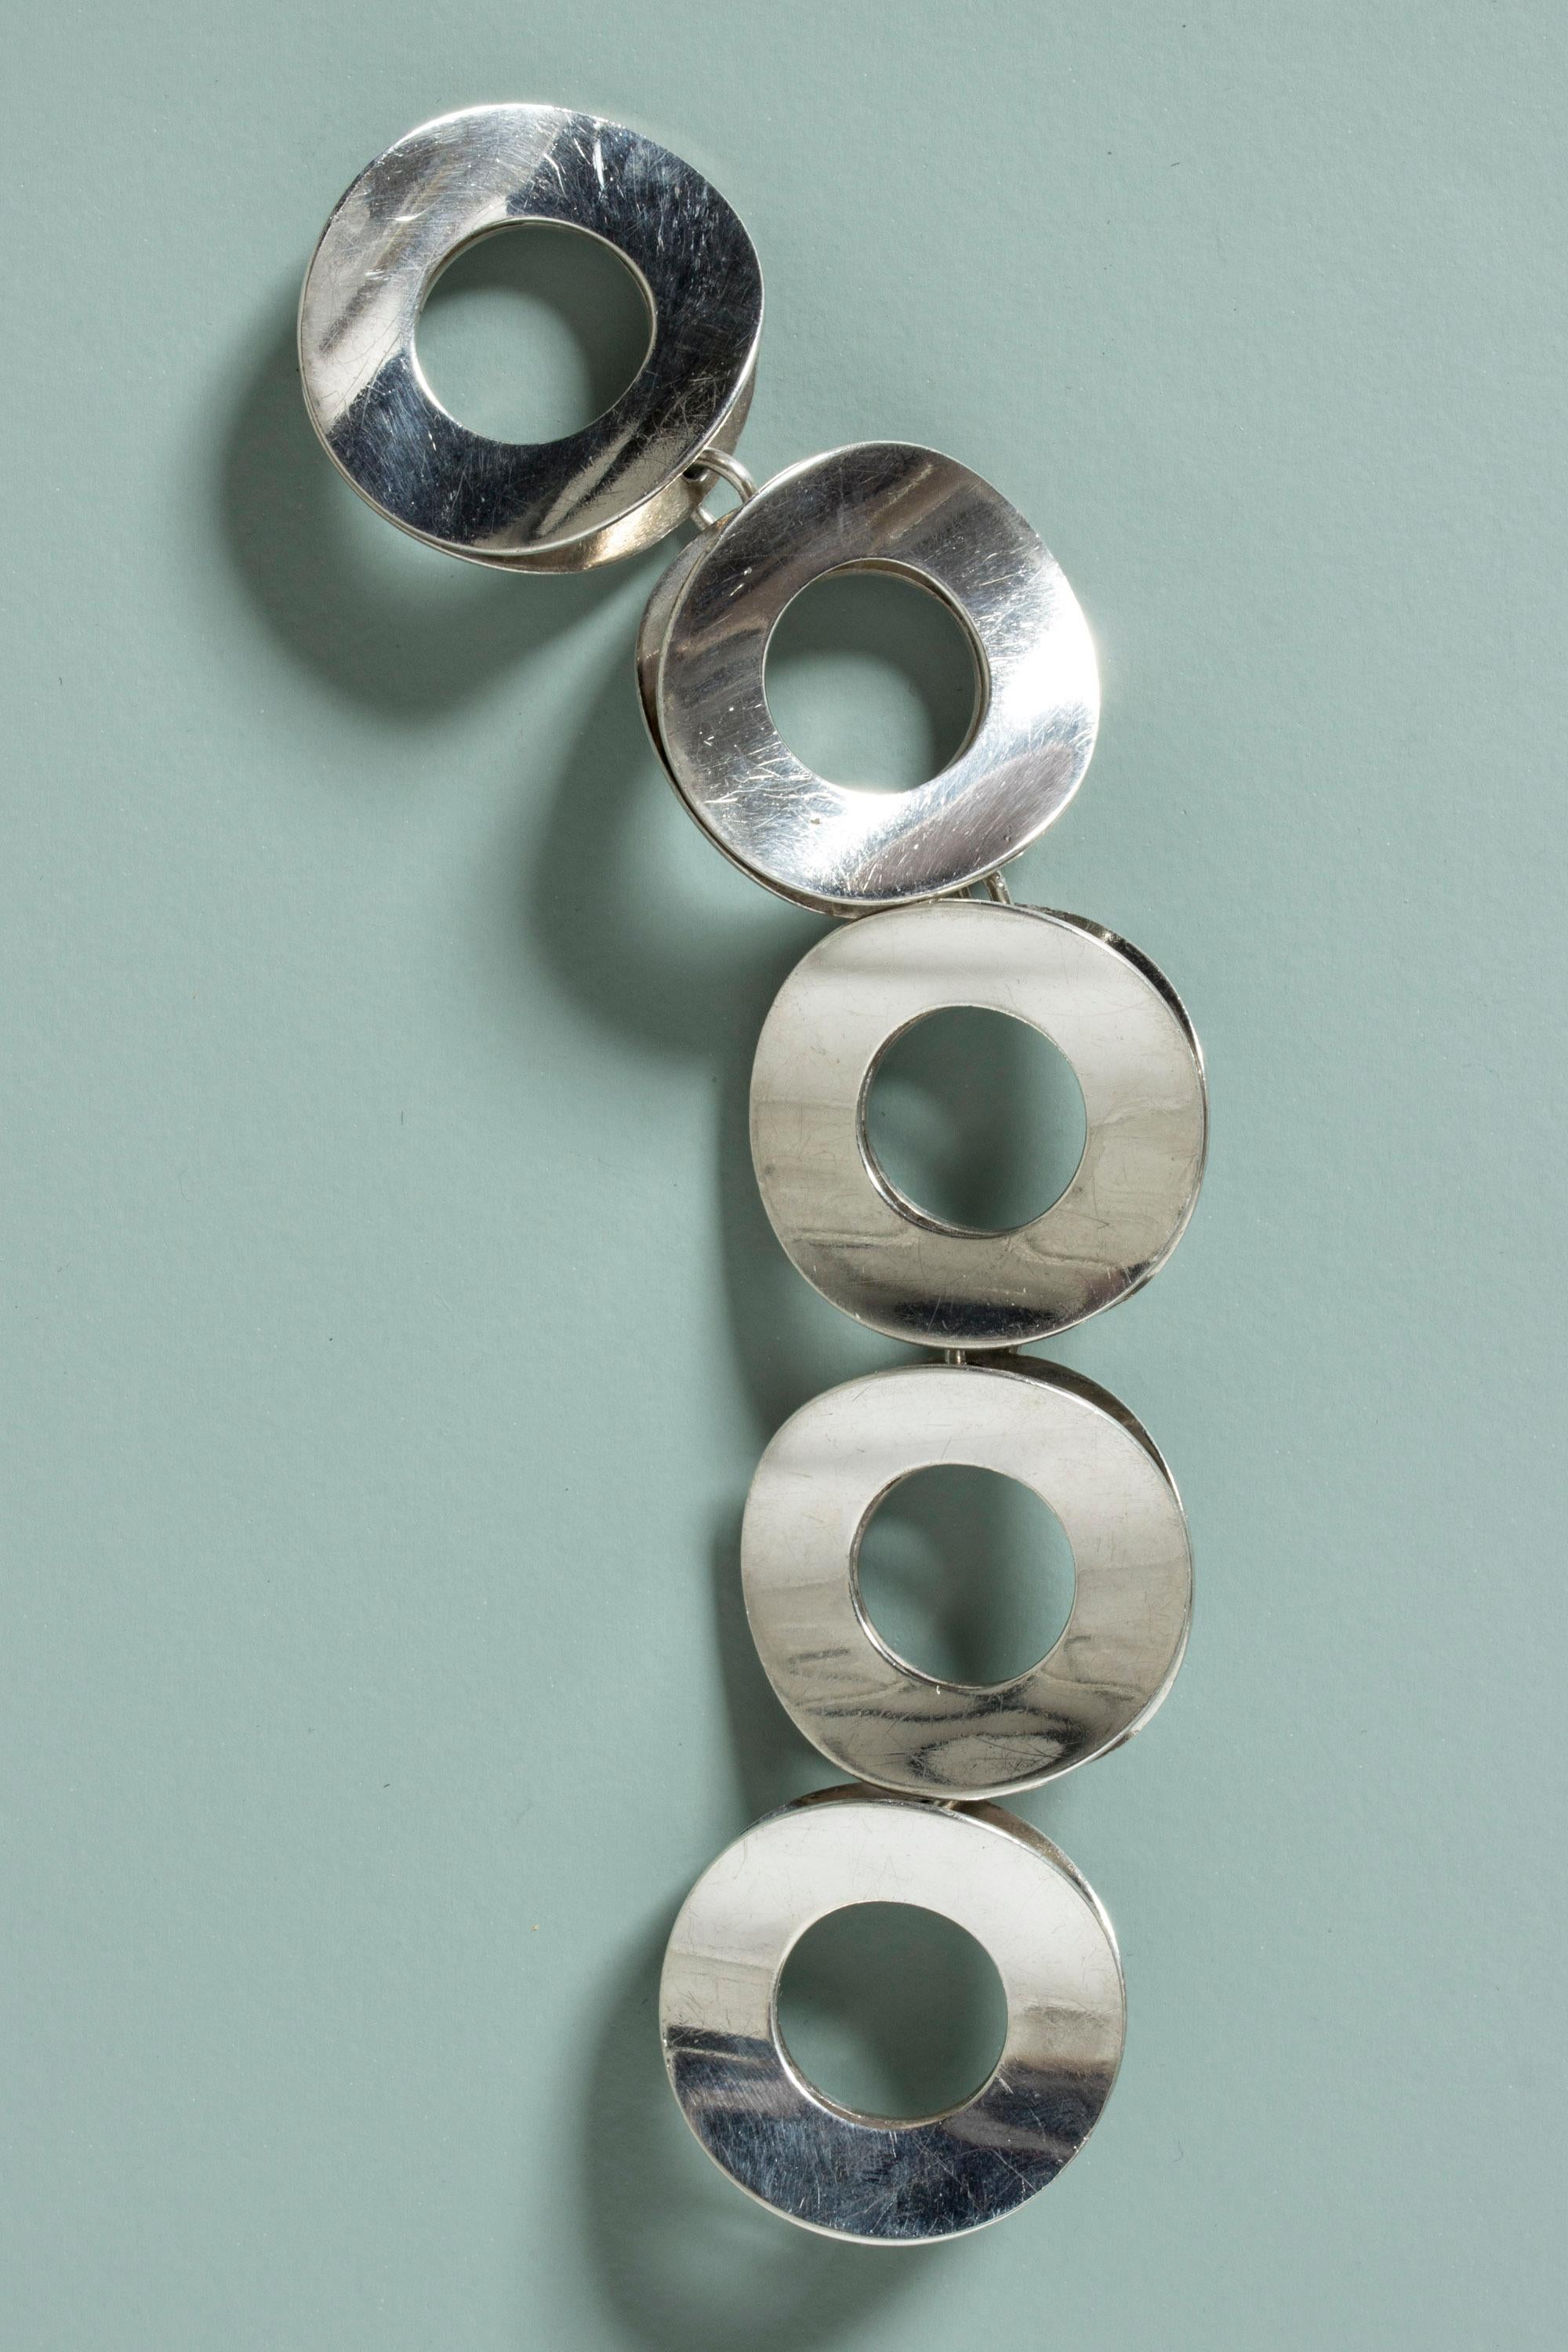 Amazing silver bracelet by Tone Vigeland, in an oversized graphic design of large silver discs. Very expressive, quite heavy yet comfortable around the wrist thanks to the concave form of the discs.